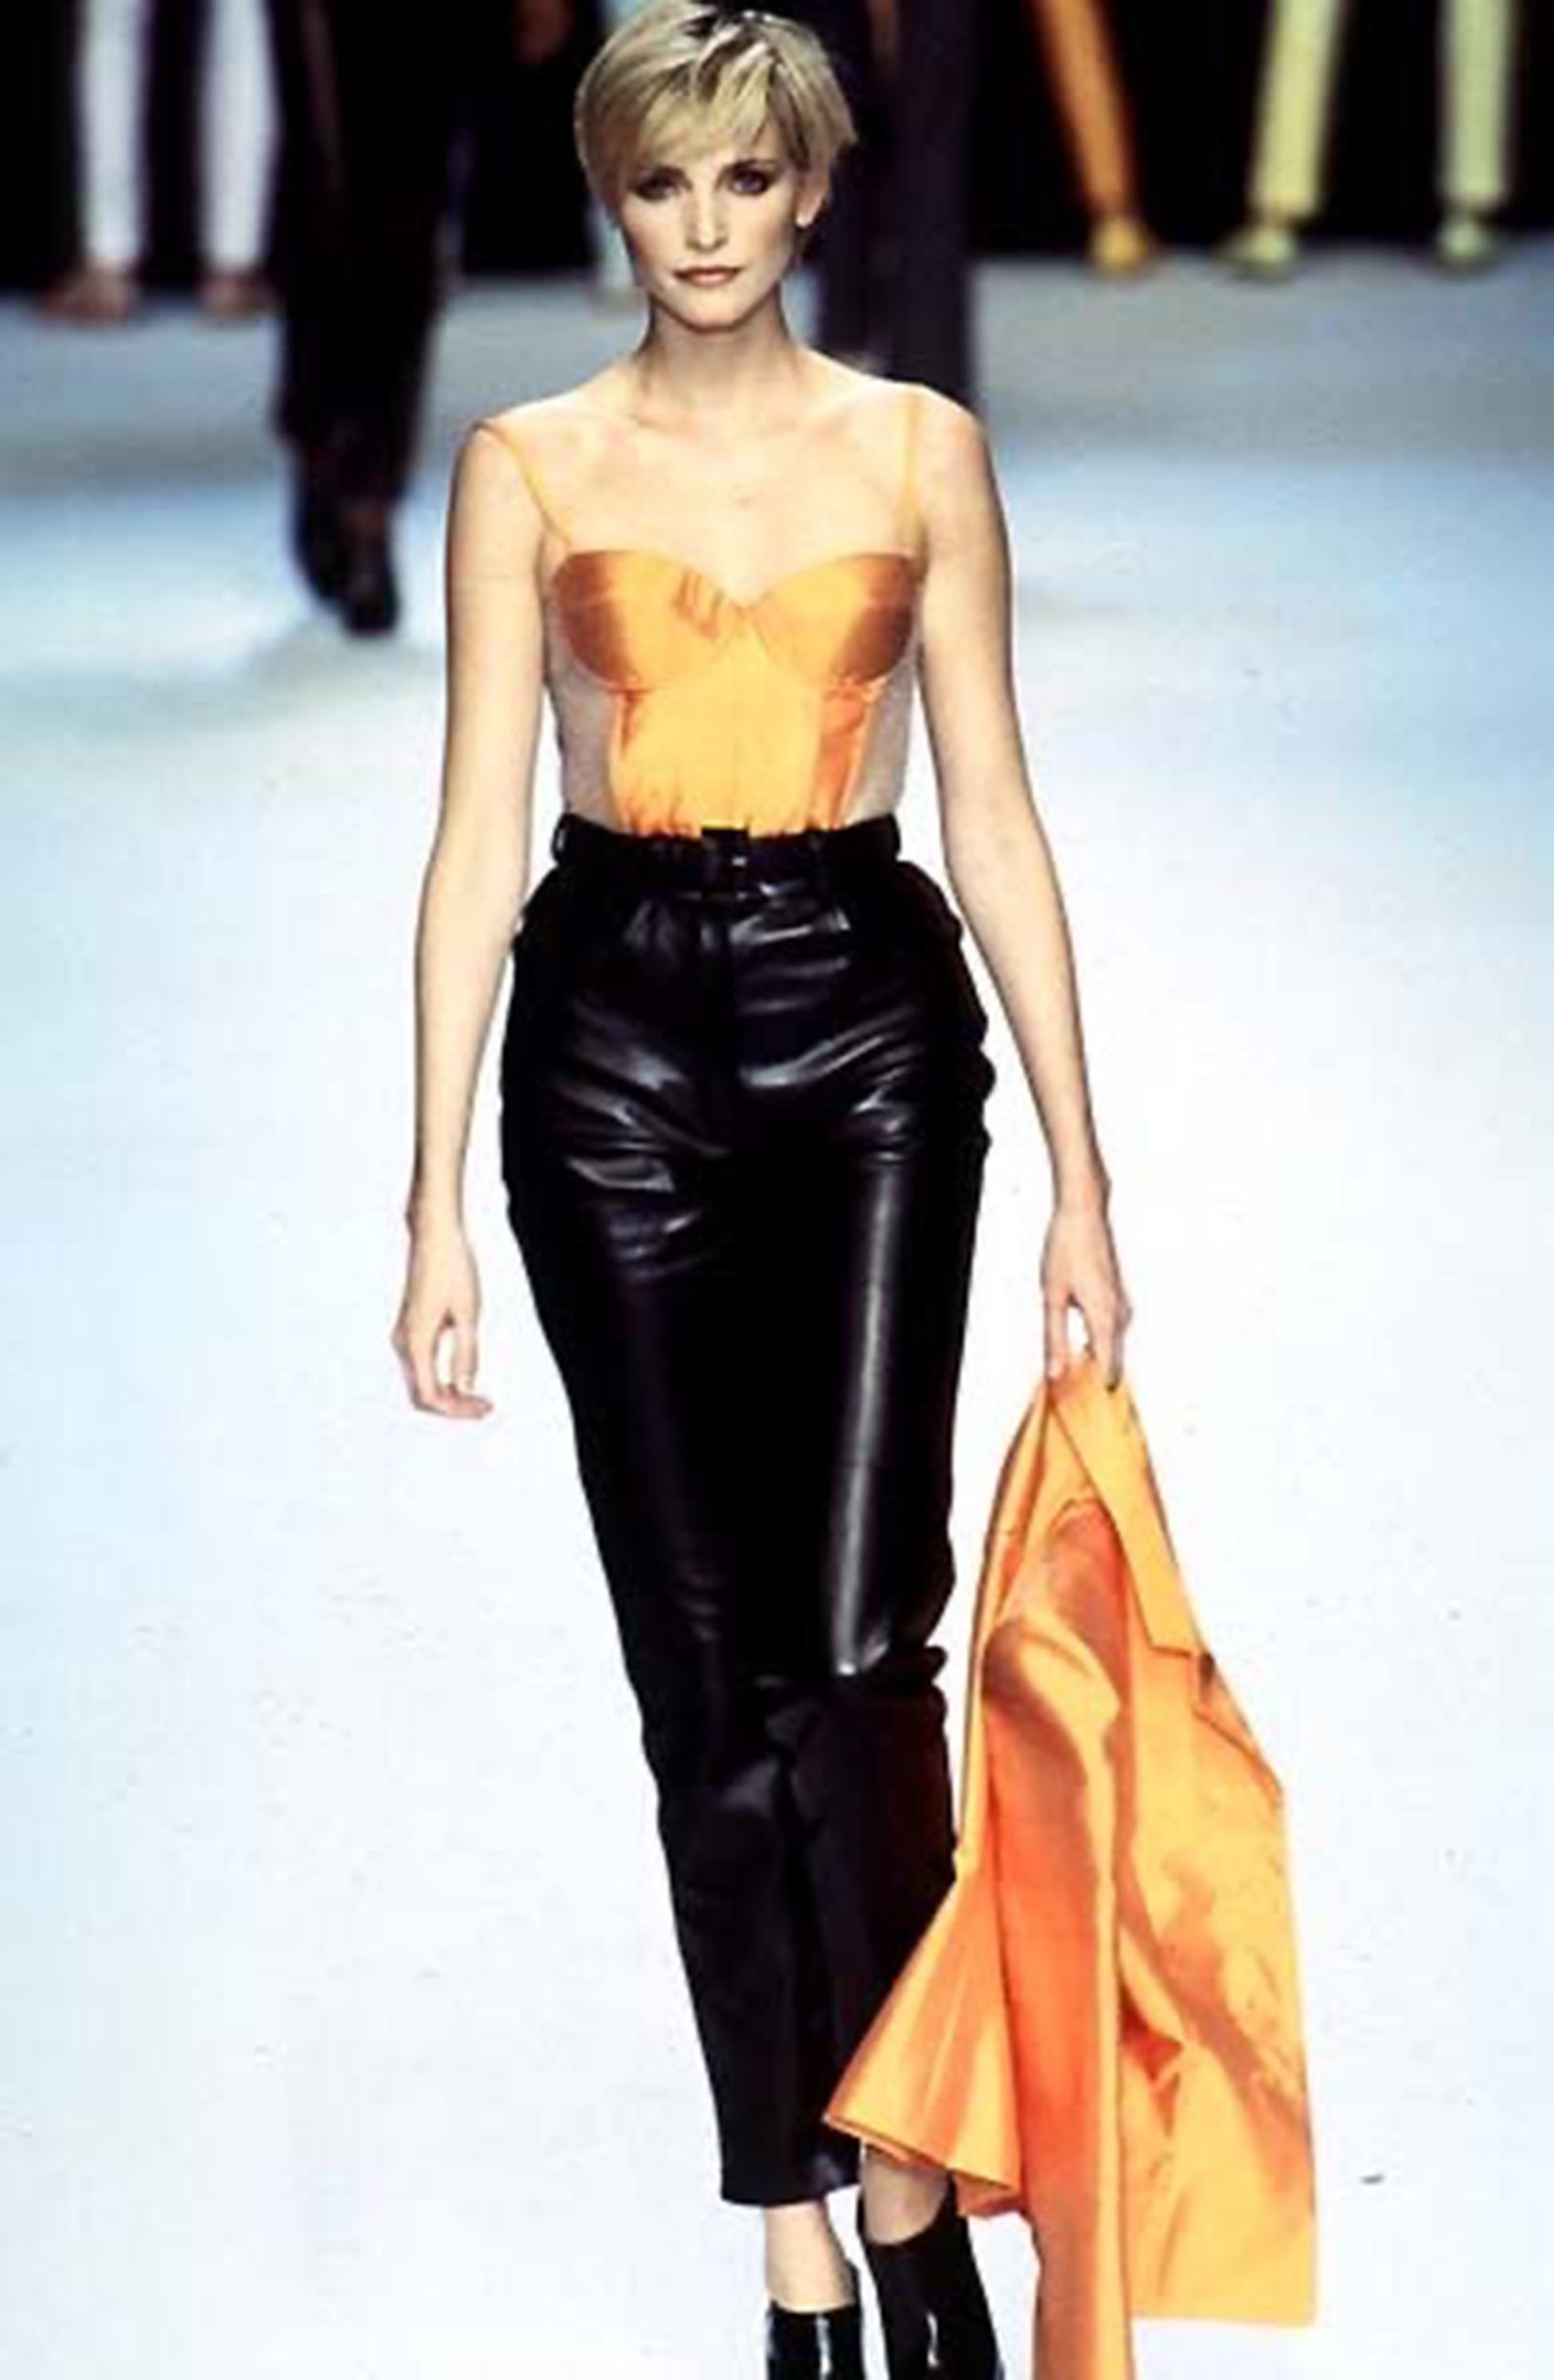 Amazing Christian Dior by Gianfranco Ferre Spring Summer 1997 red leather pants as seen on the runway in black on supermodel Nadja Auermann. These high waited red leather pants also made an appearance in one of Gianfranco Ferre’s earlier collections